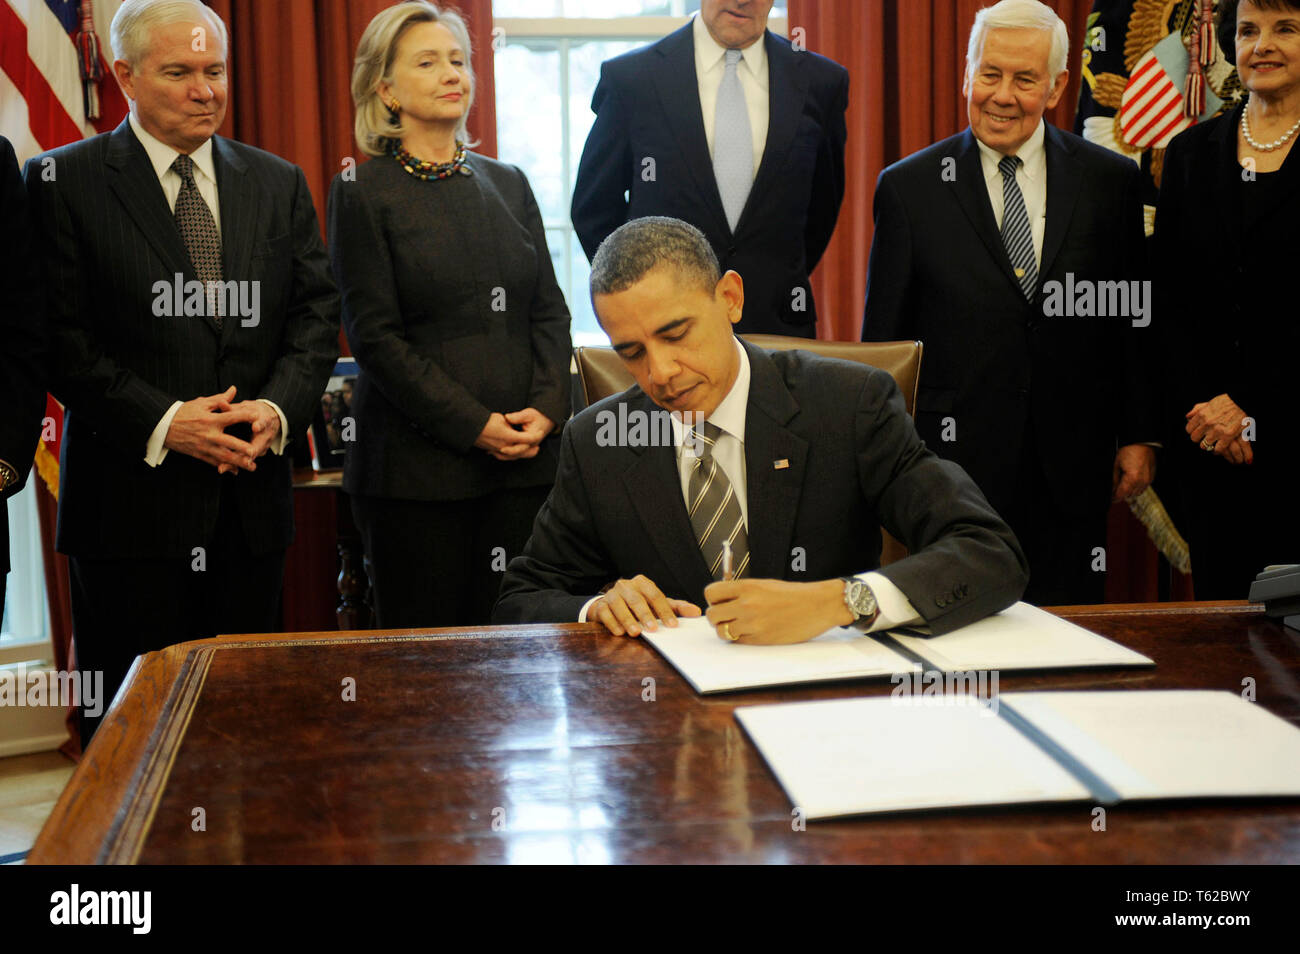 ***FILE PHOTO*** Former Senator Richard Lugar Has Passed Away. United States President Barack Obama signs the New START Treaty during a ceremony in the Oval Office of the White House, with, from left, U.S. Secretary of Defense Robert Gates, U.S. Secretary of State Hillary Rodham Clinton, U.S. Senator John Kerry (Democrat of Massachusetts), U.S. Senator Richard Lugar (Republican of Indiana), and U.S. Senator Dianne Feinstein (Democrat of California) .Credit: Leslie E. Kossoff/Pool via CNP. /MediaPunch Stock Photo